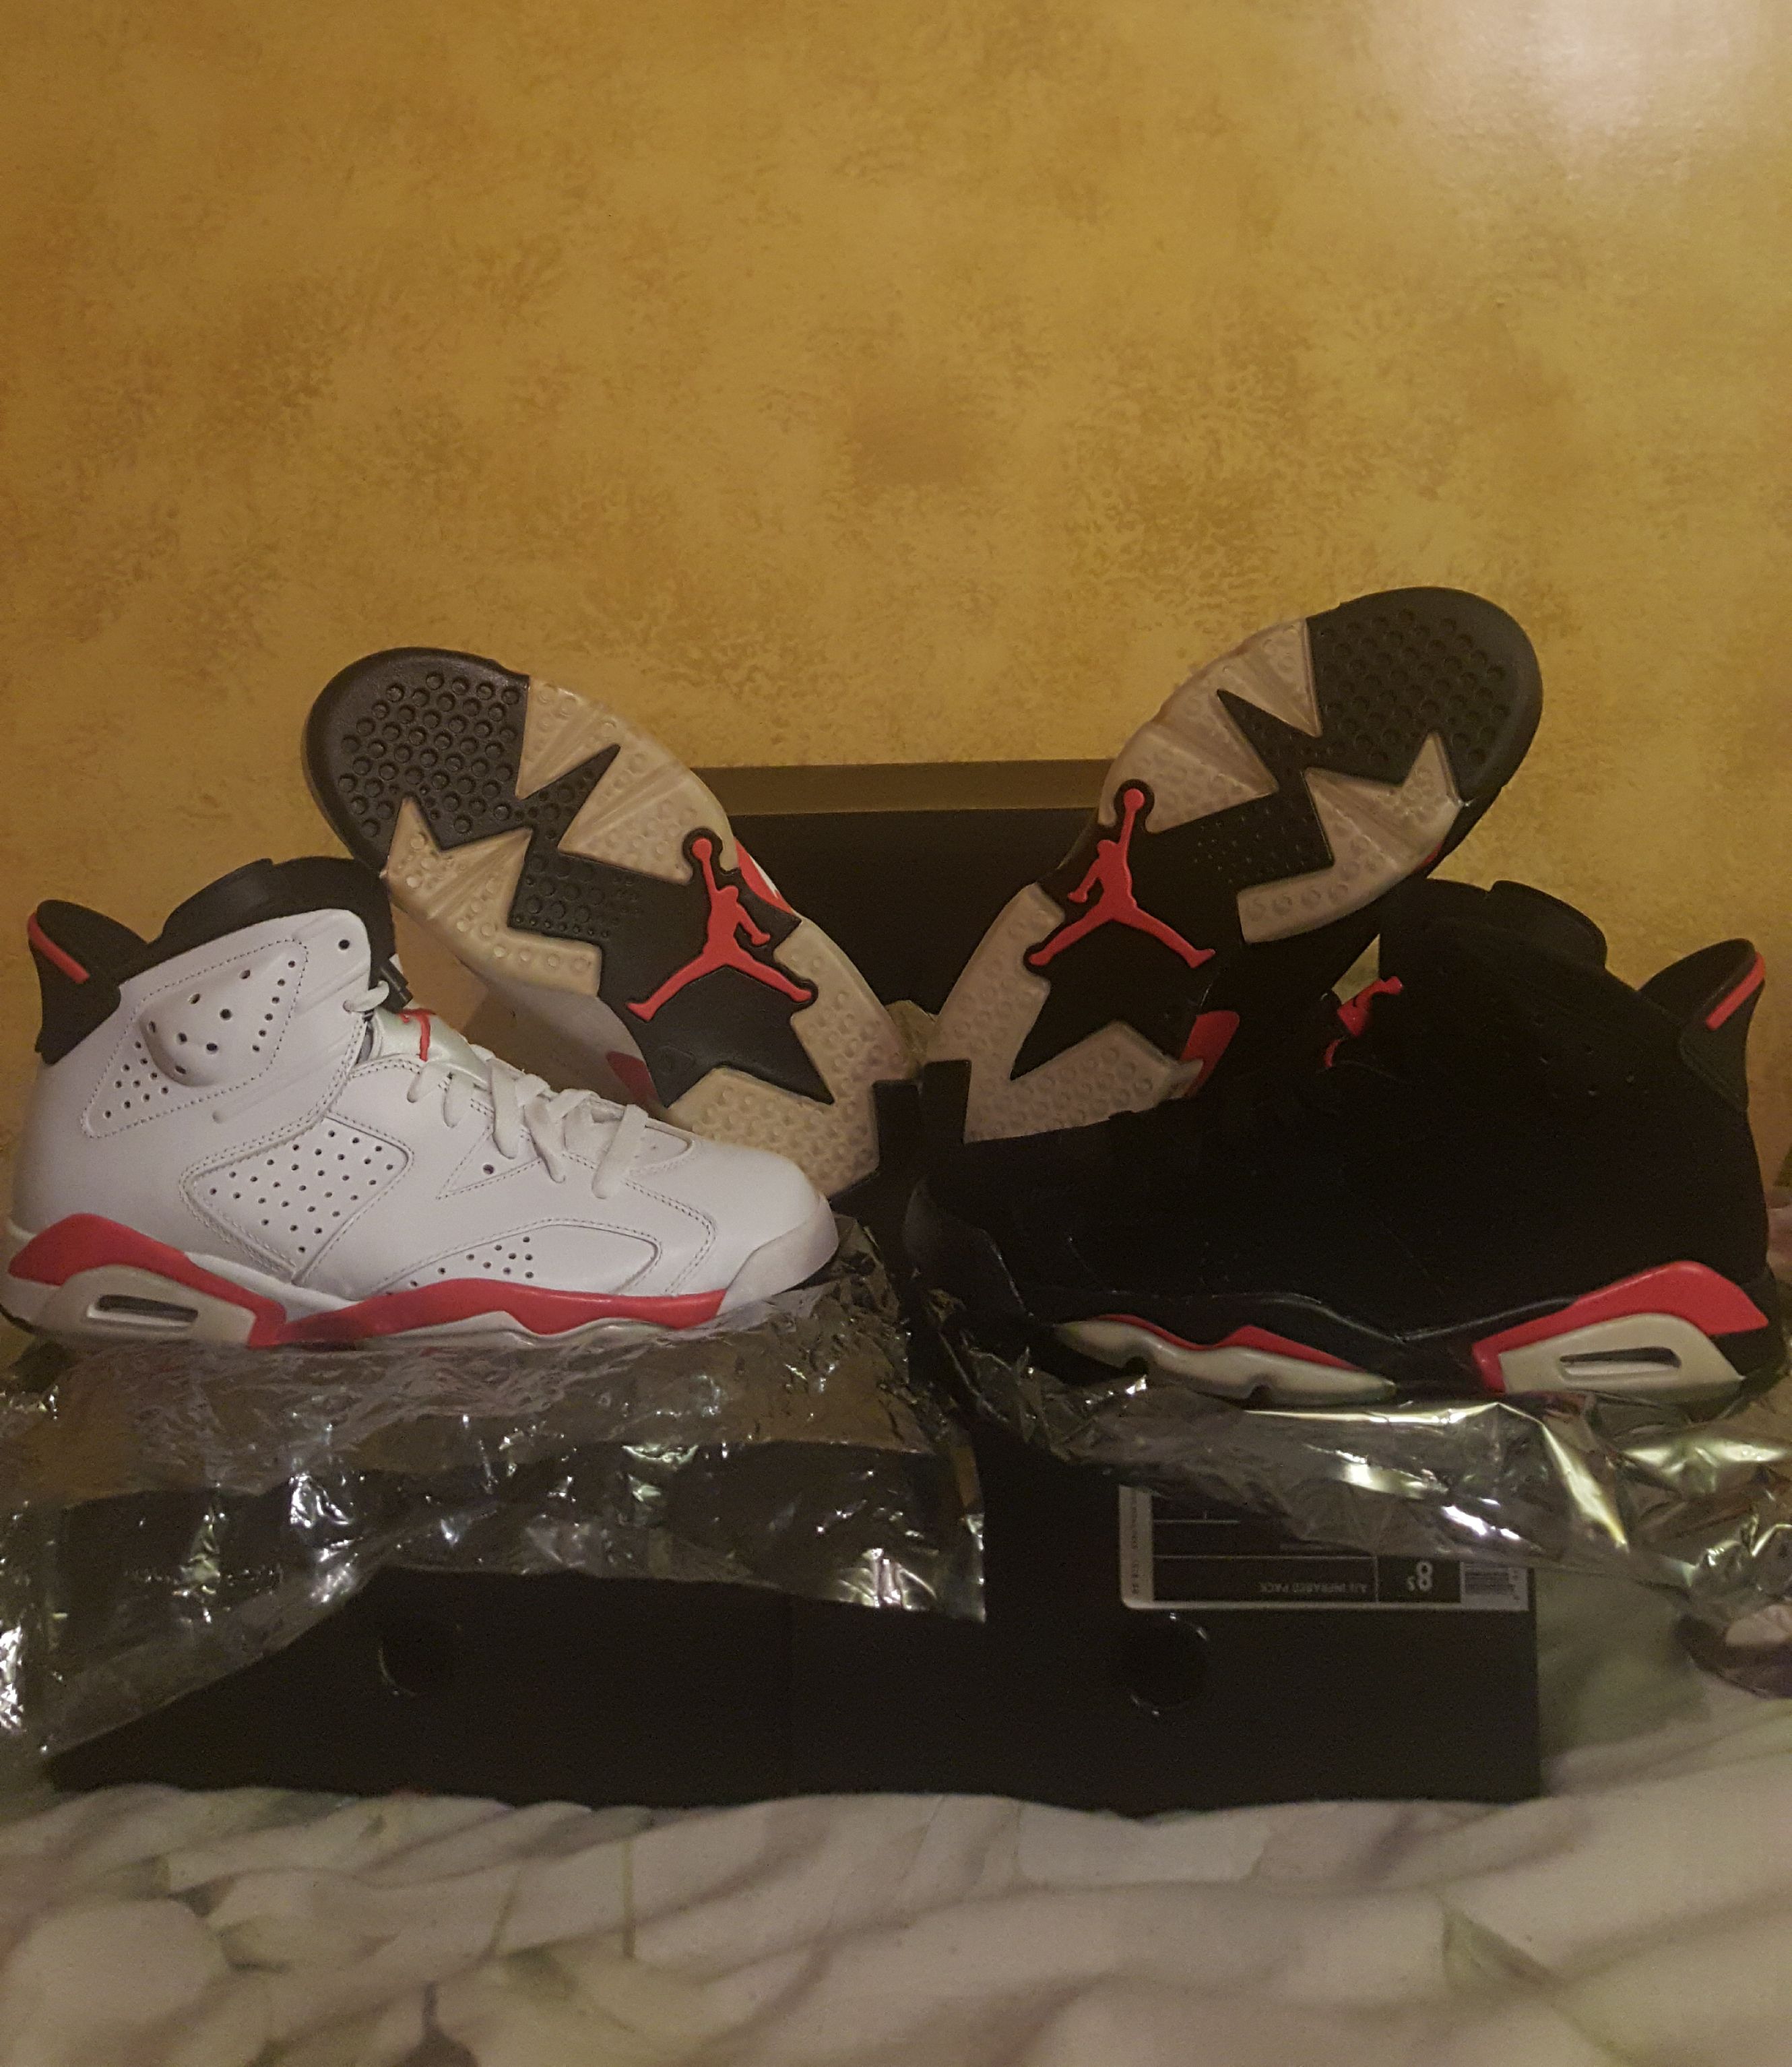 2010 DS Air Jordan 6 Infrared Pack size 8.5